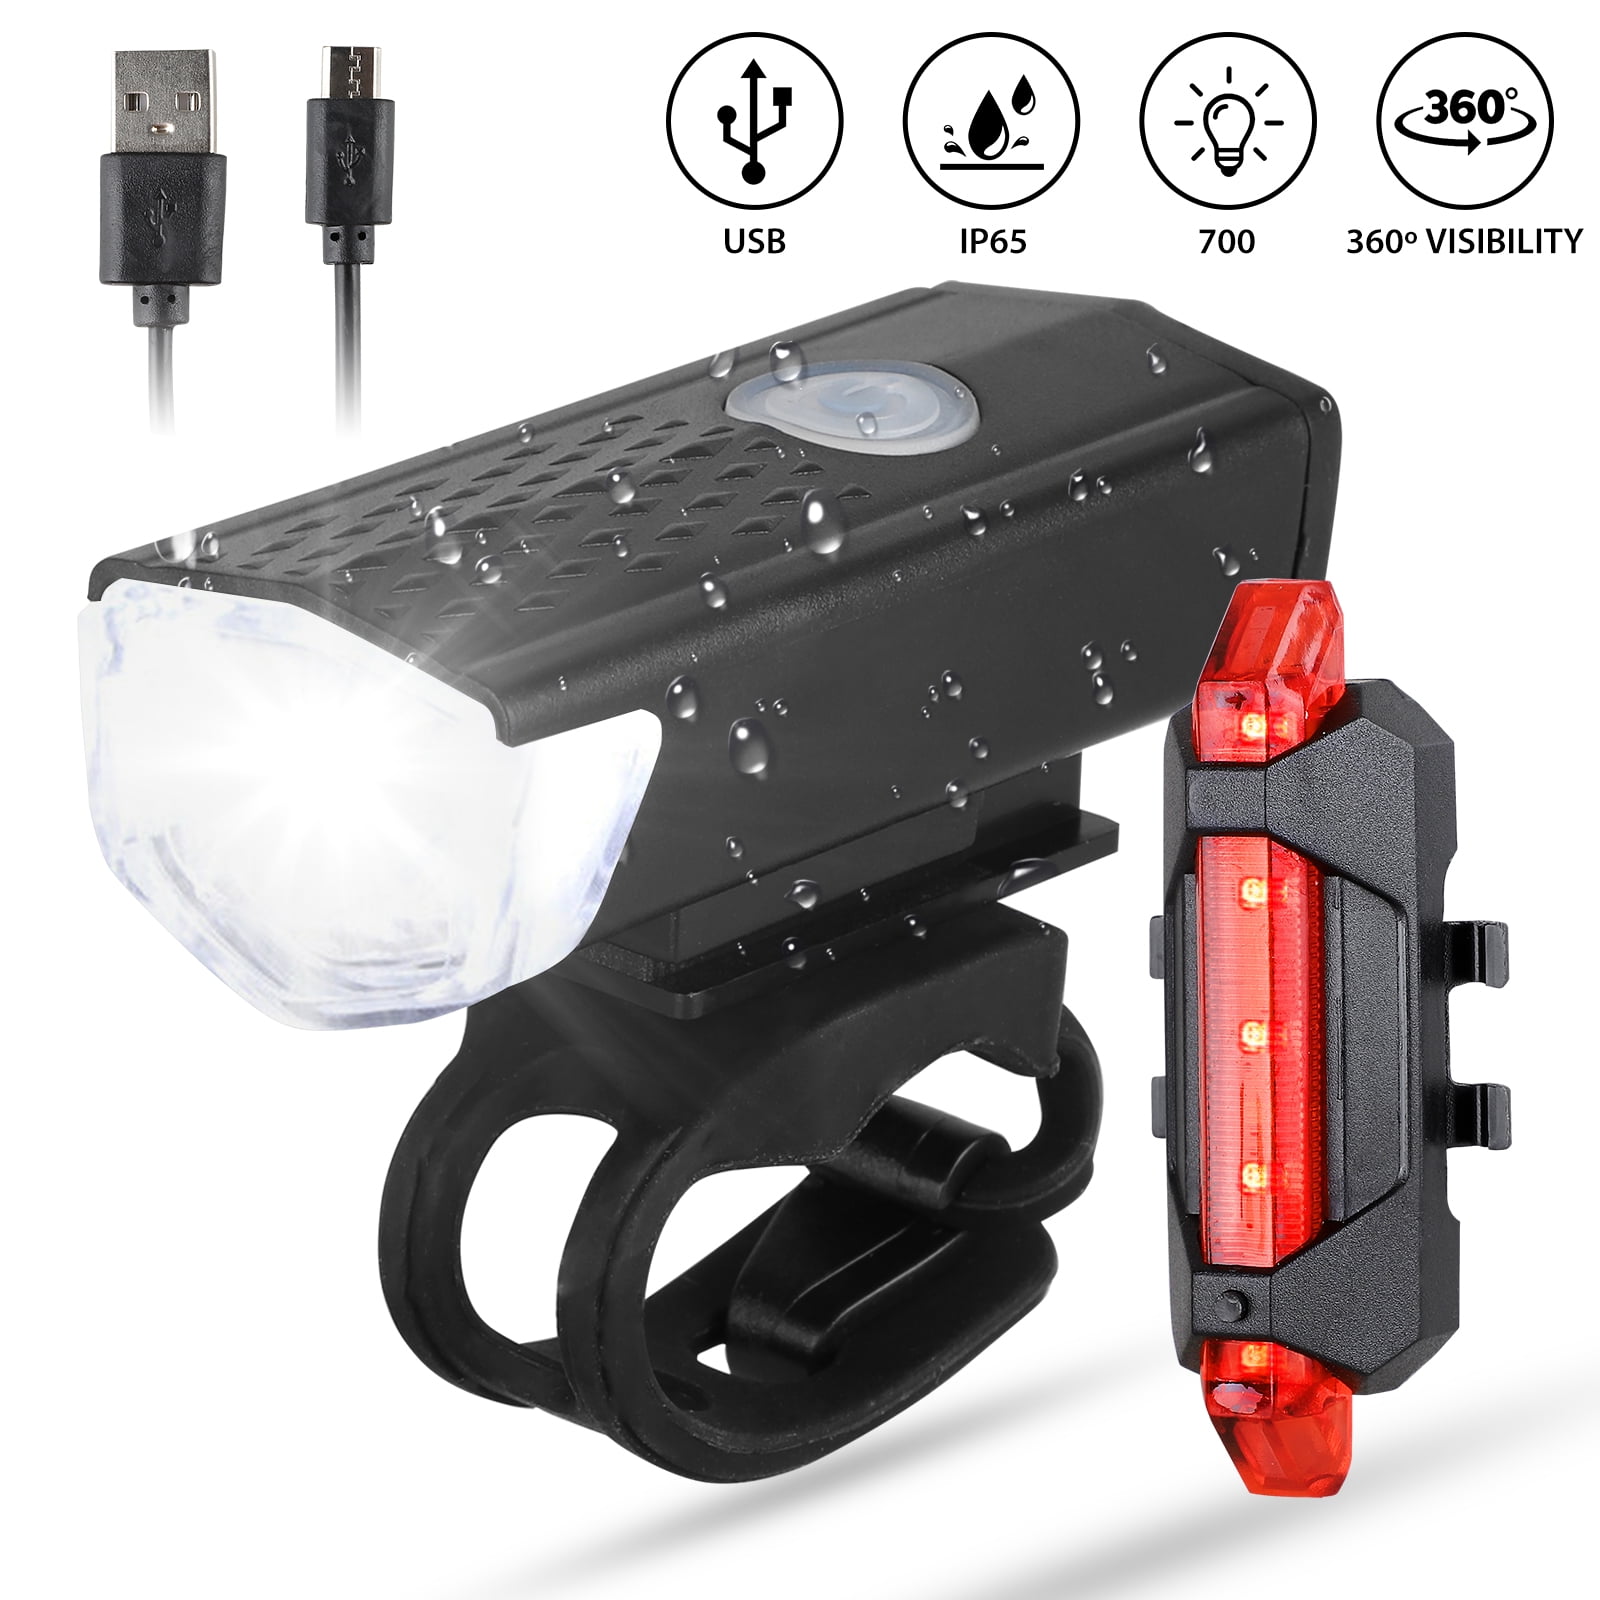 Waterproof Super Bright Rear Tail Light Lamp 3 Modes for Bicycle Bike Cycling